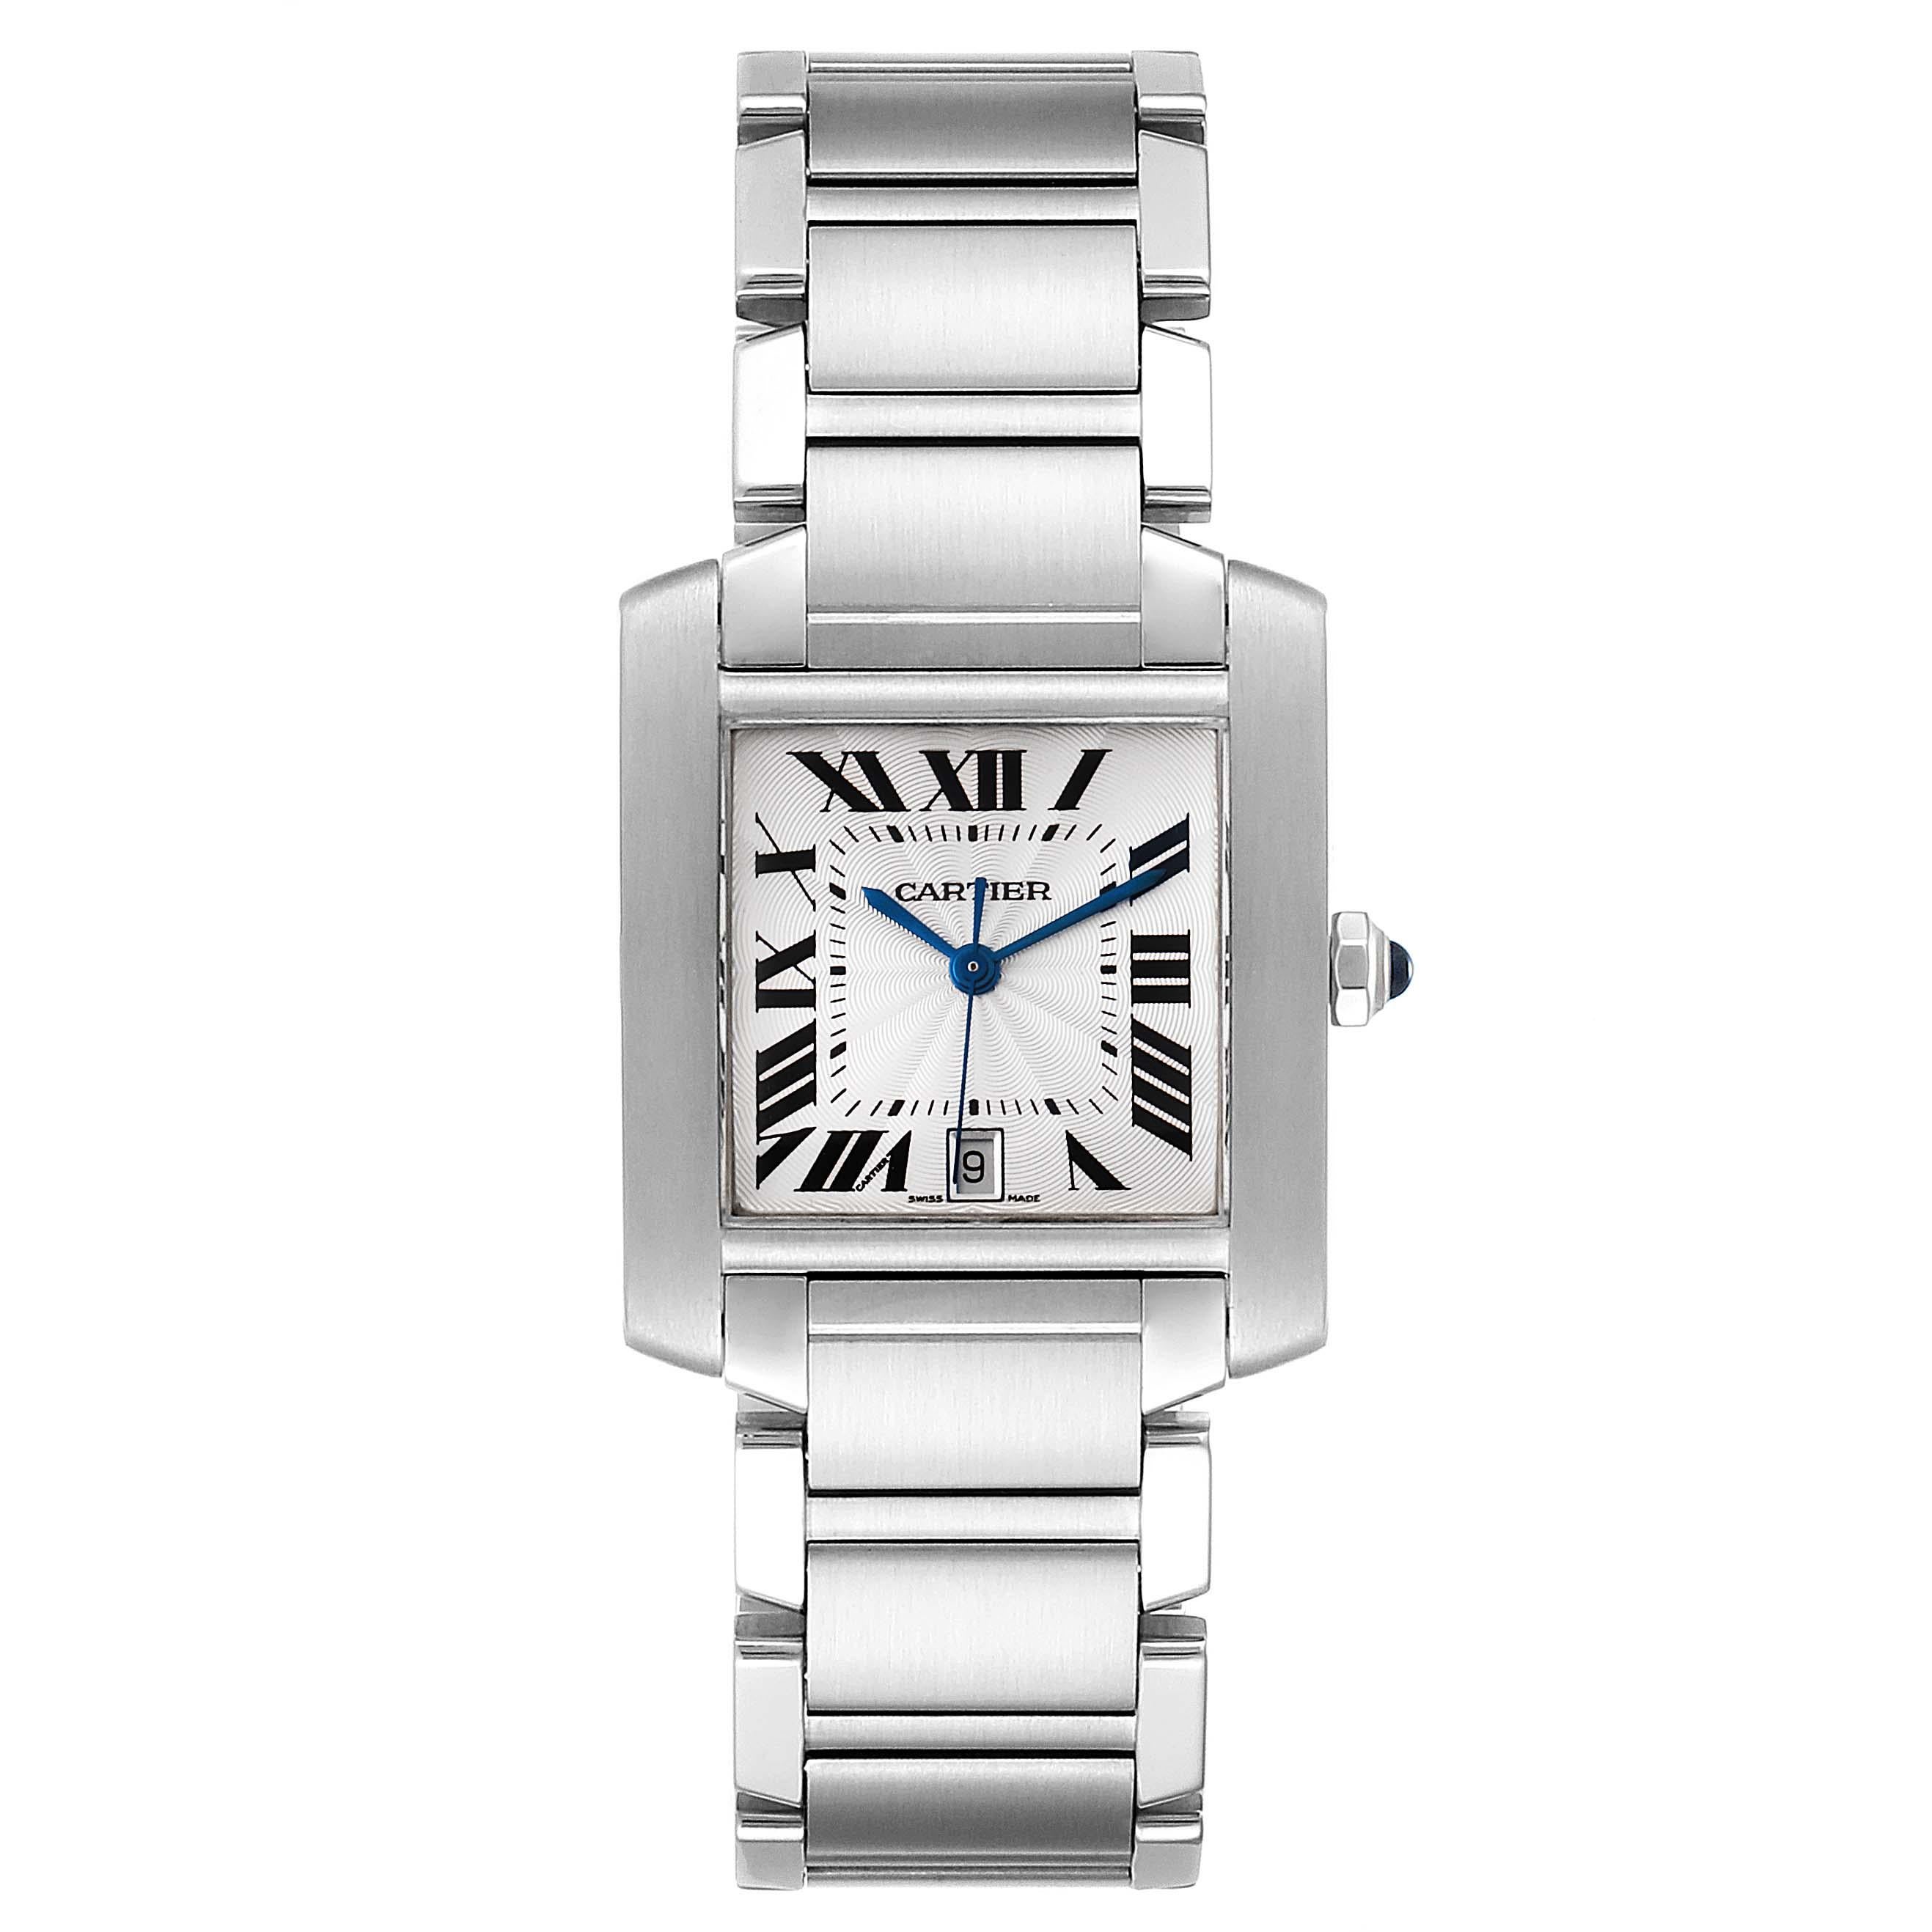 Cartier Tank Francaise Blue Hands Steel Automatic Mens Watch W51002Q3. Automatic self-winding movement. Rectangular stainless steel 28.0 x 32.0 mm case. Octagonal crown set with a blue spinel cabochon. . Scratch resistant sapphire crystal. Silver